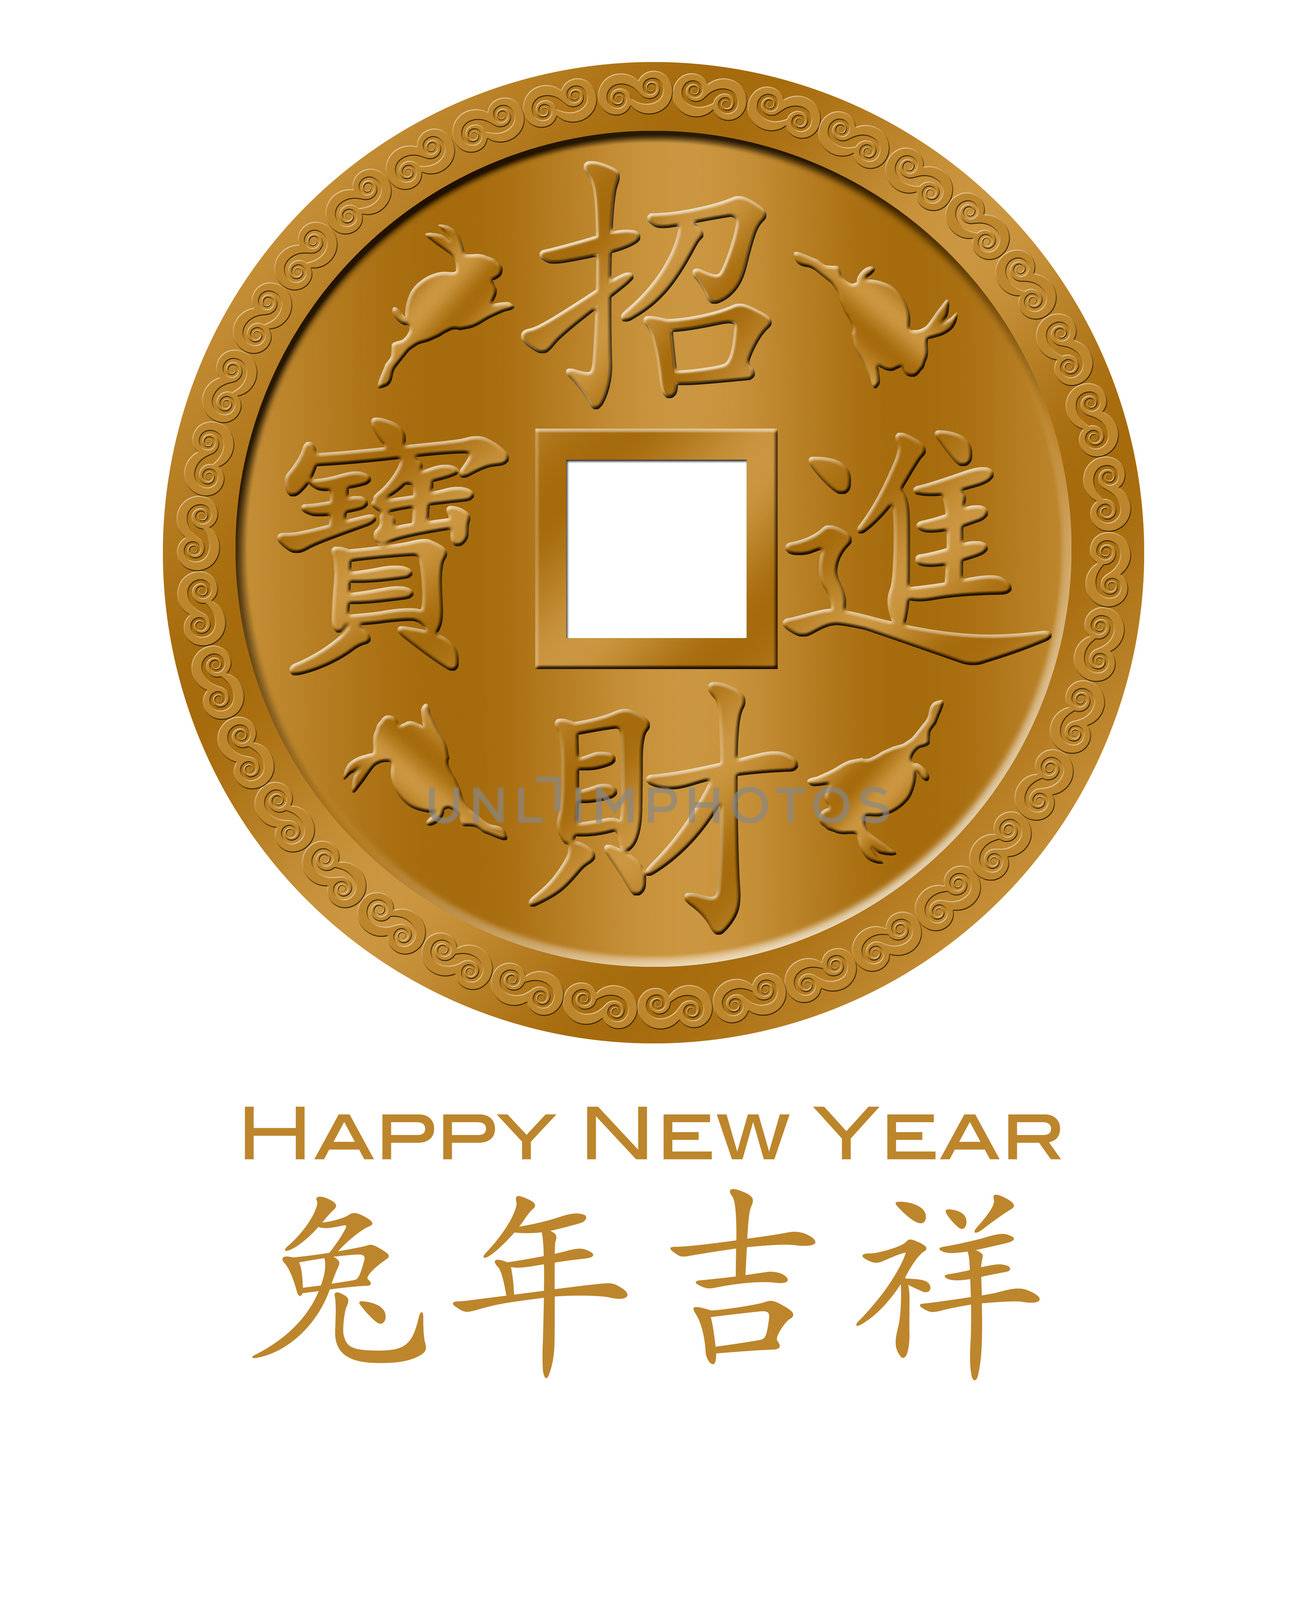 Happy New Year of the Rabbit 2011 Chinese Gold Coin by Davidgn